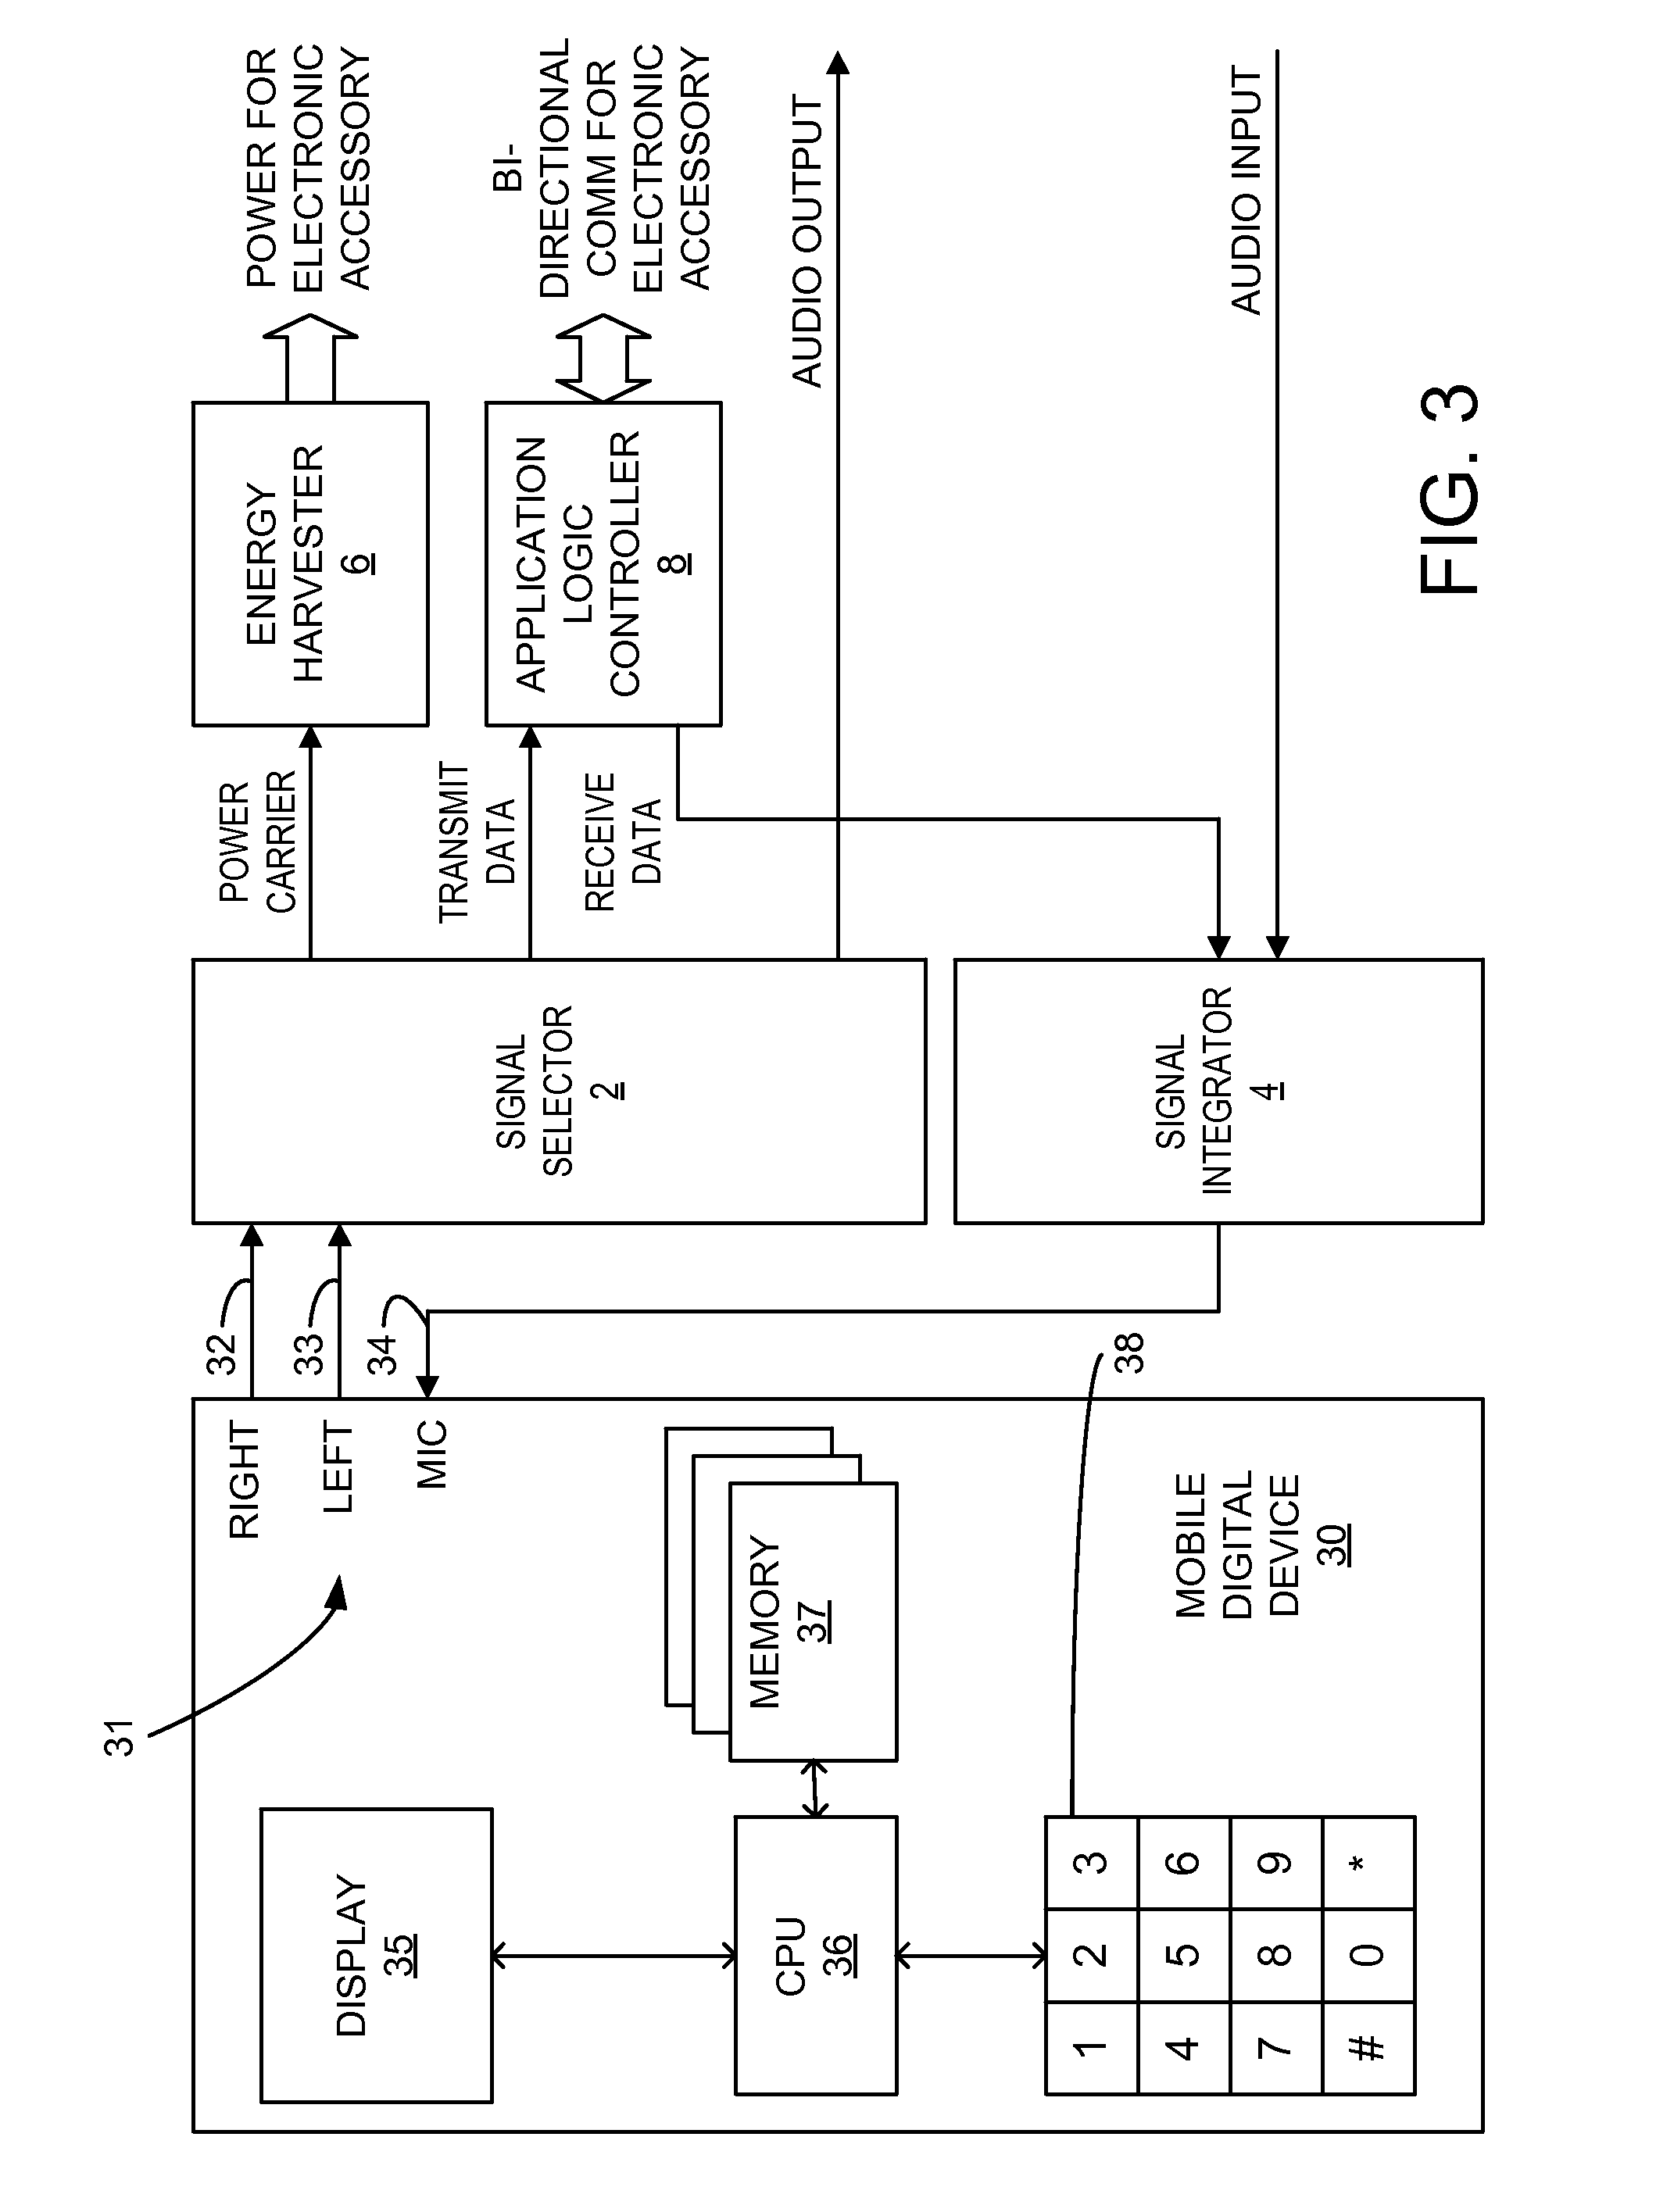 Method and Apparatus for Controlling and Powering an Electronic Accessory from a Mobile Digital Device